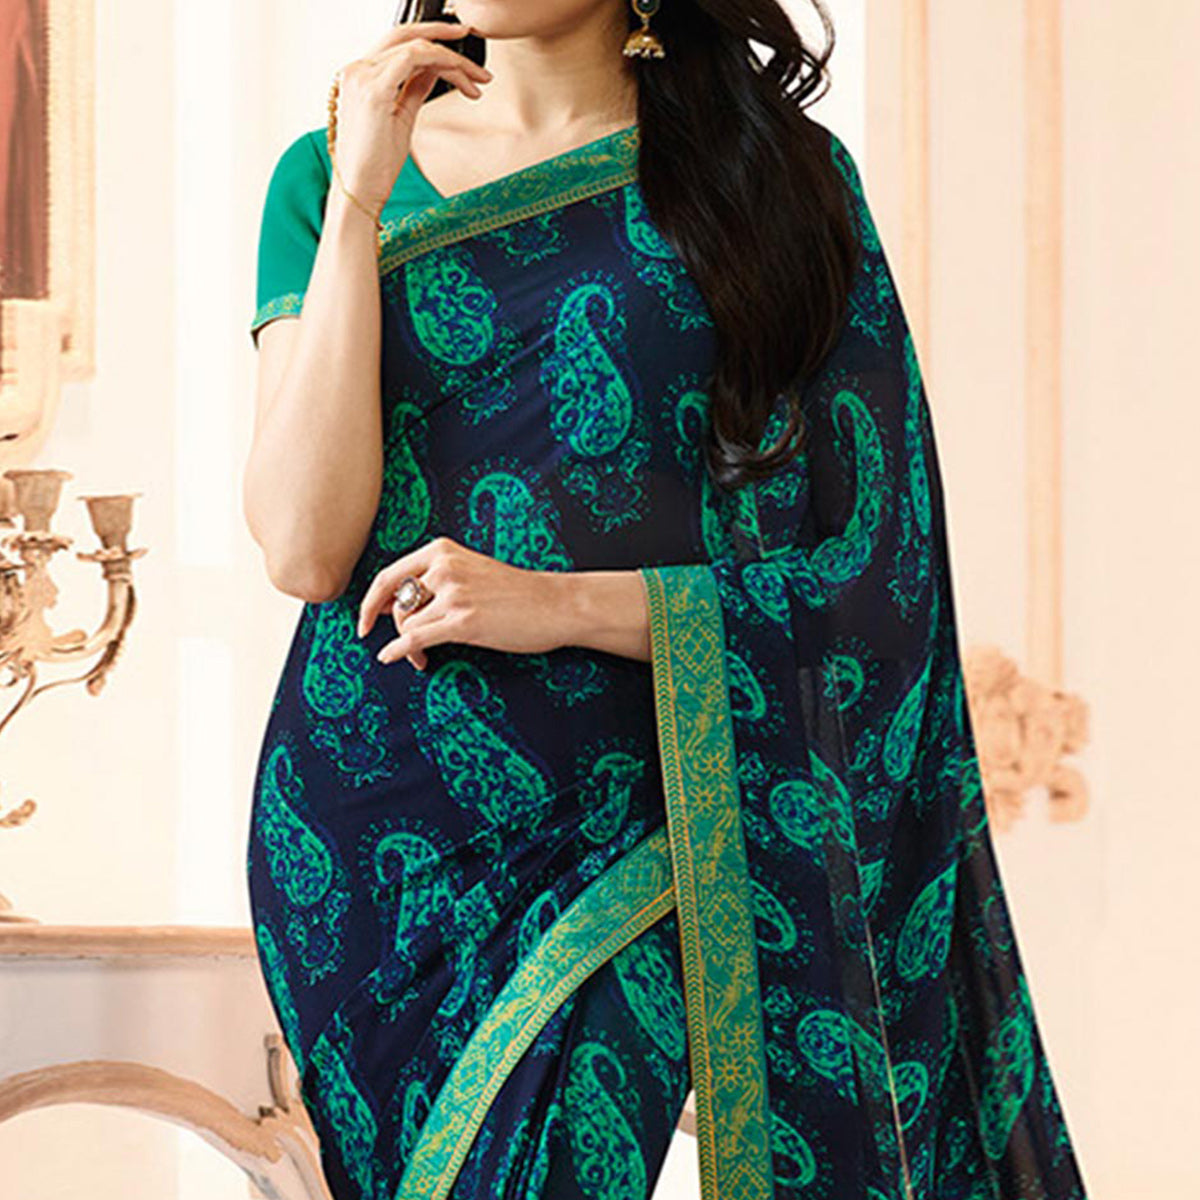 Blue Printed Georgette Saree With Lace Border